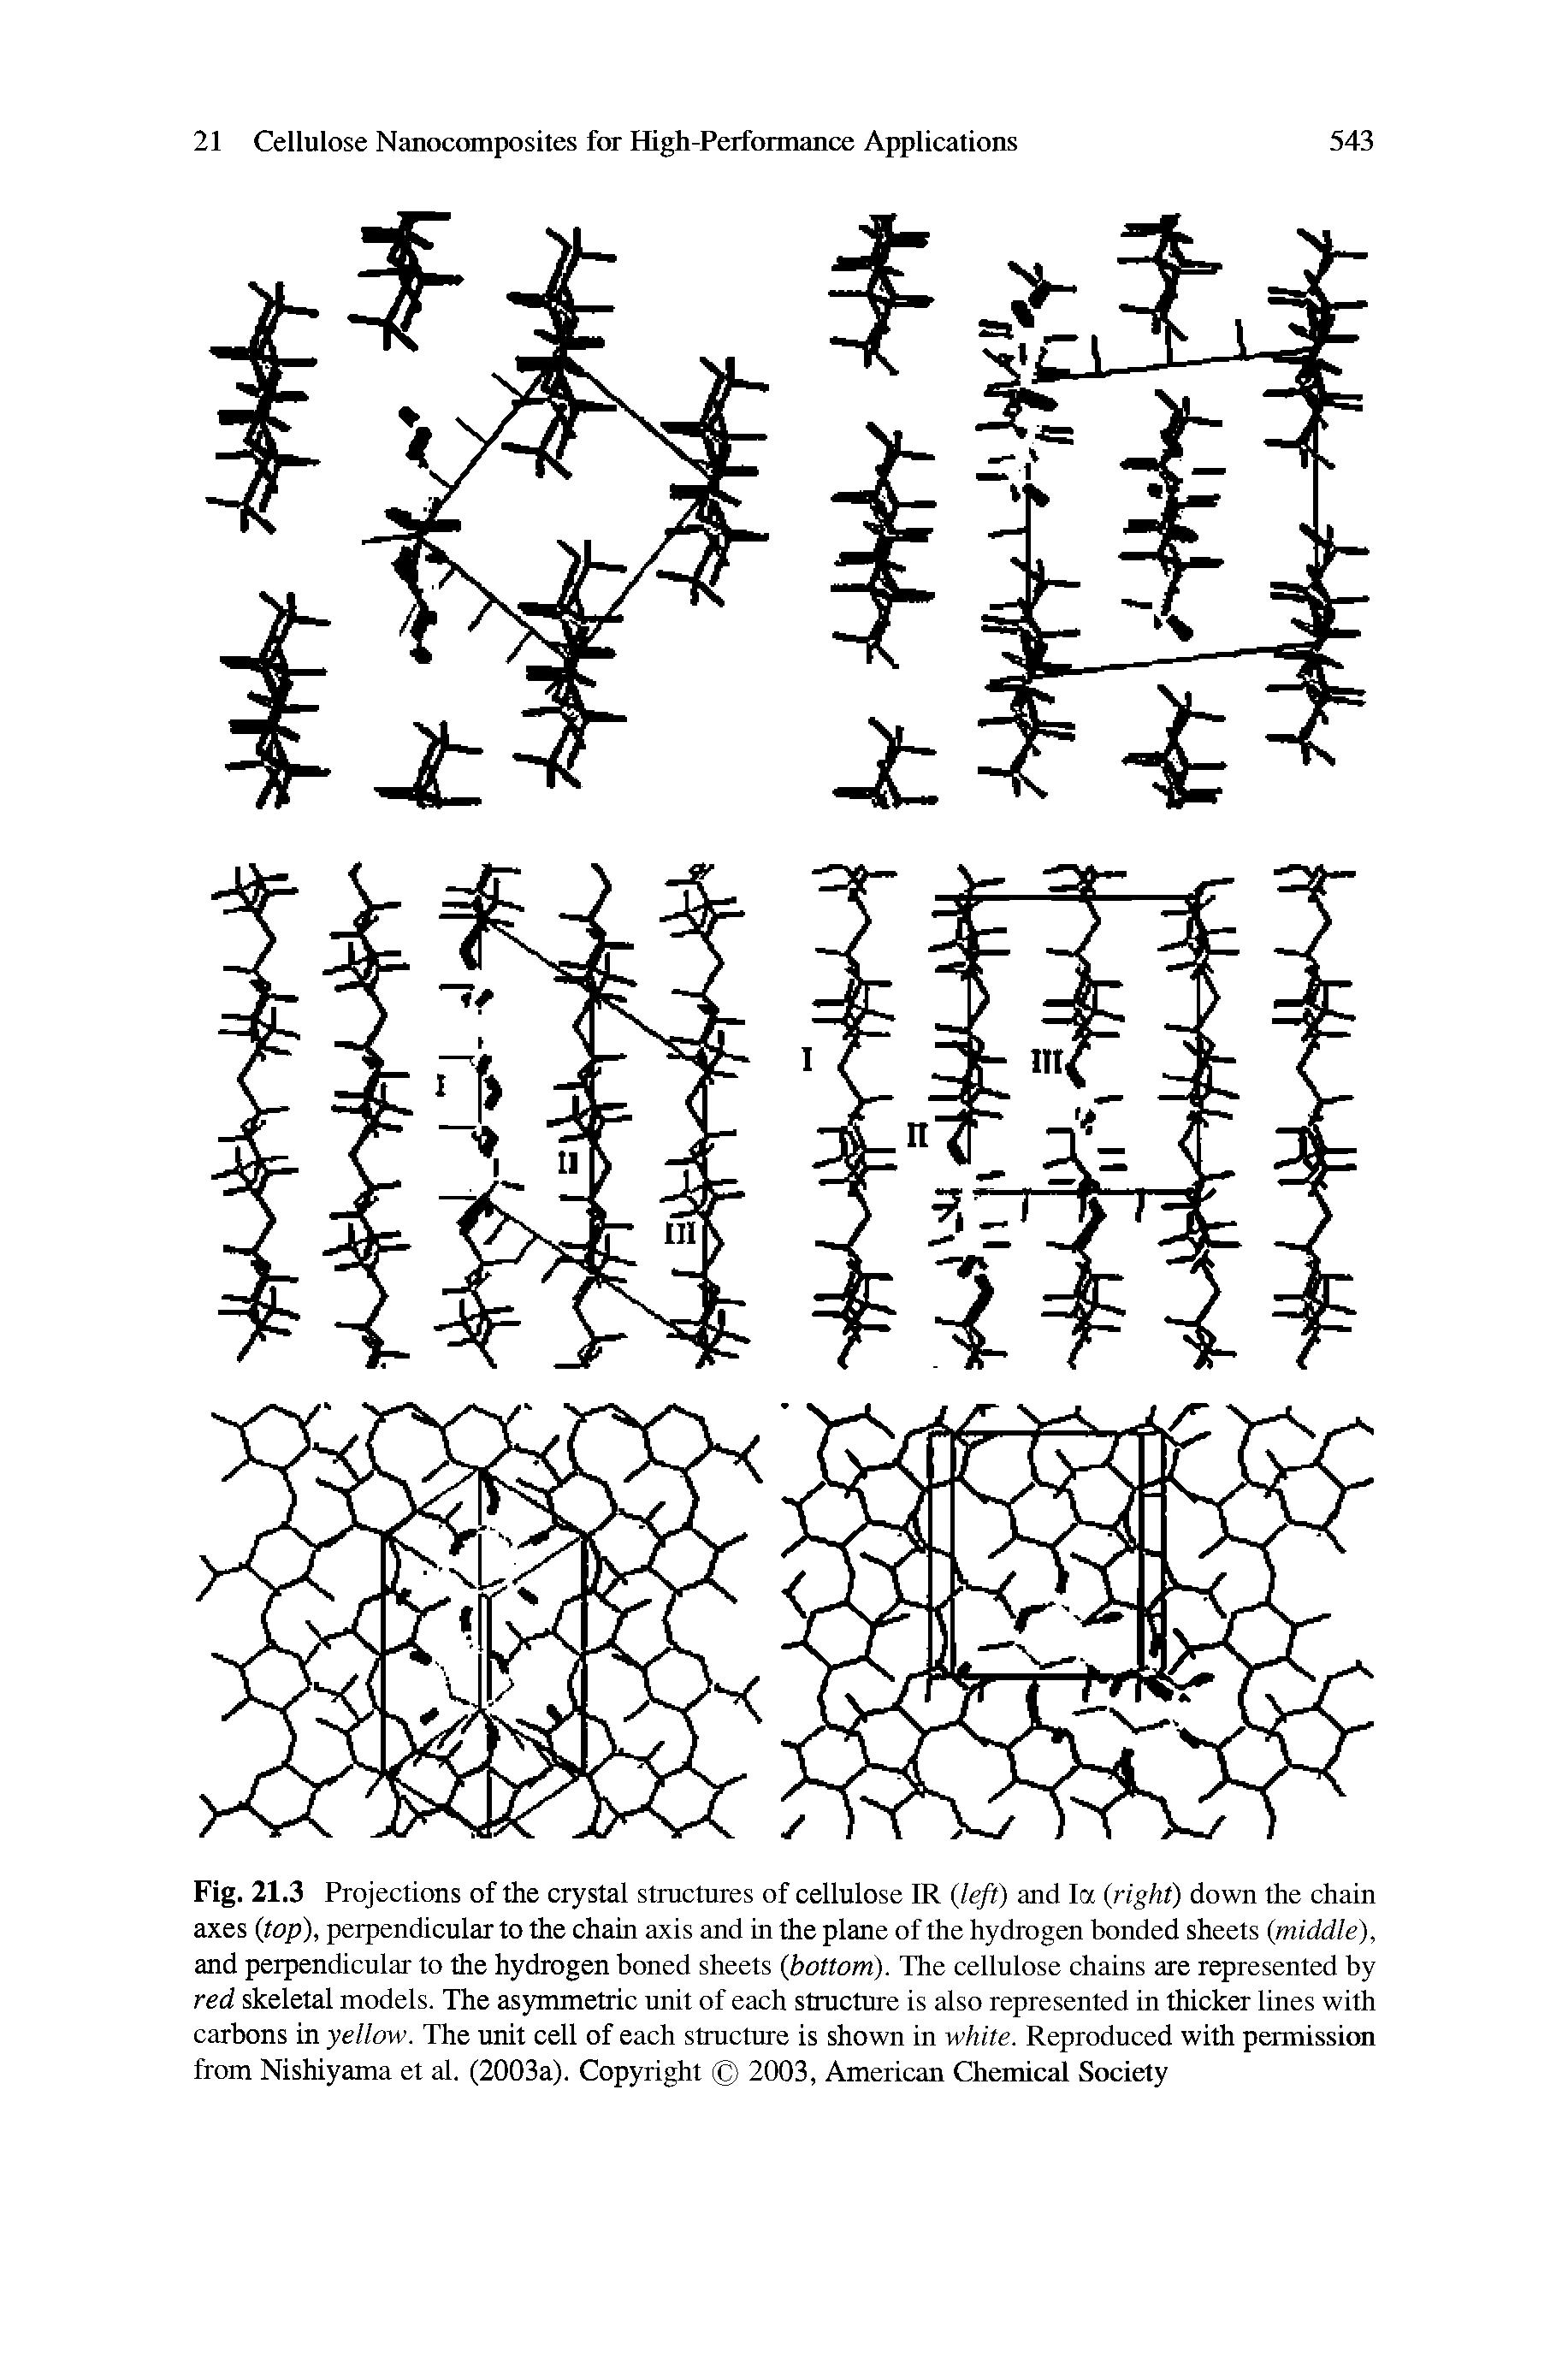 Fig. 21.3 Projections of the crystal structures of cellulose IR left) and la (right) down the chain axes (top), perpendicular to the chain axis and in the plane of the hydrogen bonded sheets (middle), and perpendicular to the hydrogen boned sheets (bottom). The cellulose chains are represented by red skeletal models. The asymmetric unit of each structure is also represented in thicker lines with carbons in yellow. The unit cell of each structure is shown in white. Reproduced with permission from Nishiyama et al. (2003a). Copyright 2003, American Chemical Society...